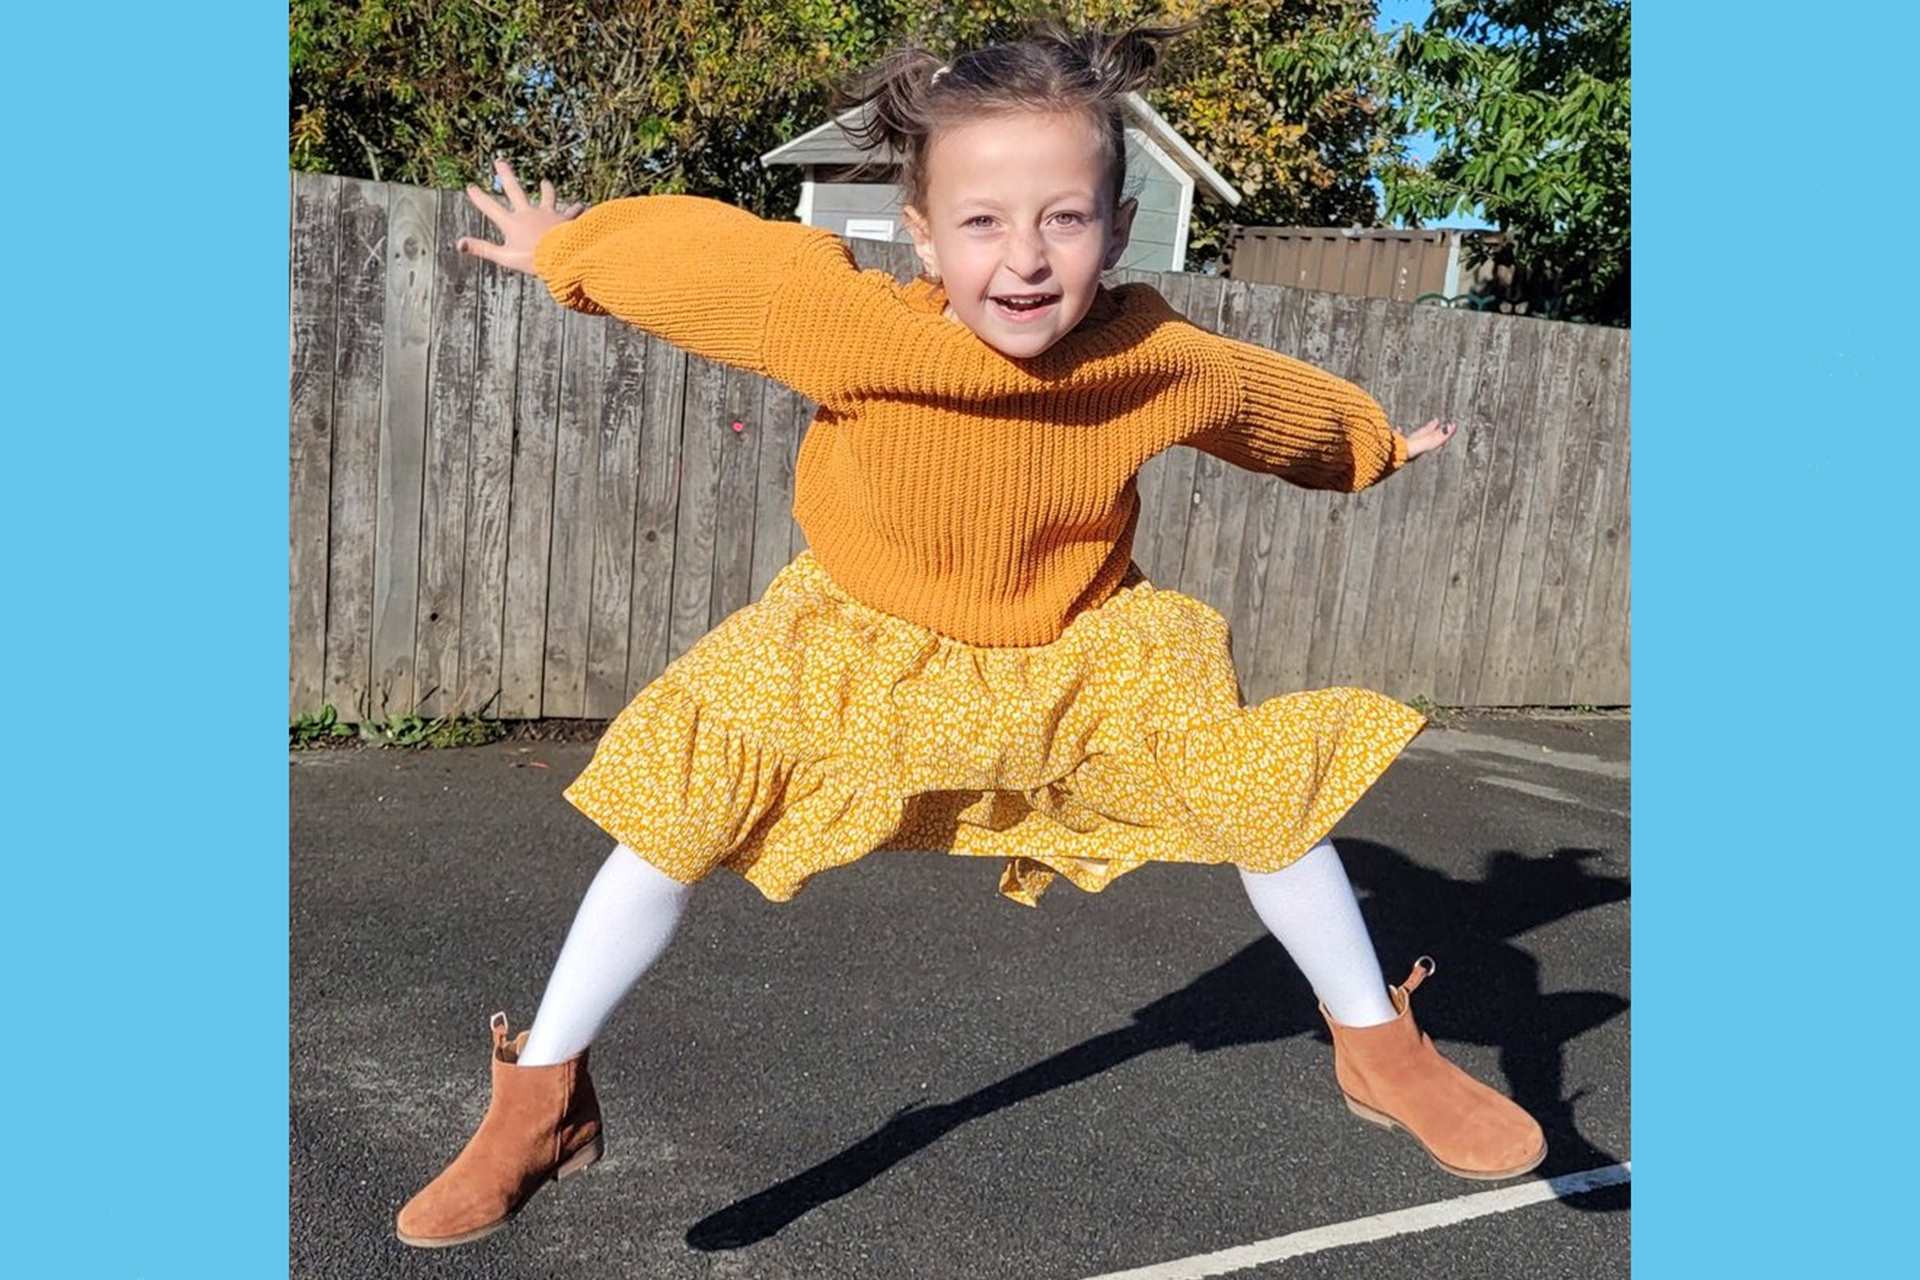 A girl from St Benets Primary School jumps in the playground wearing all yellow.